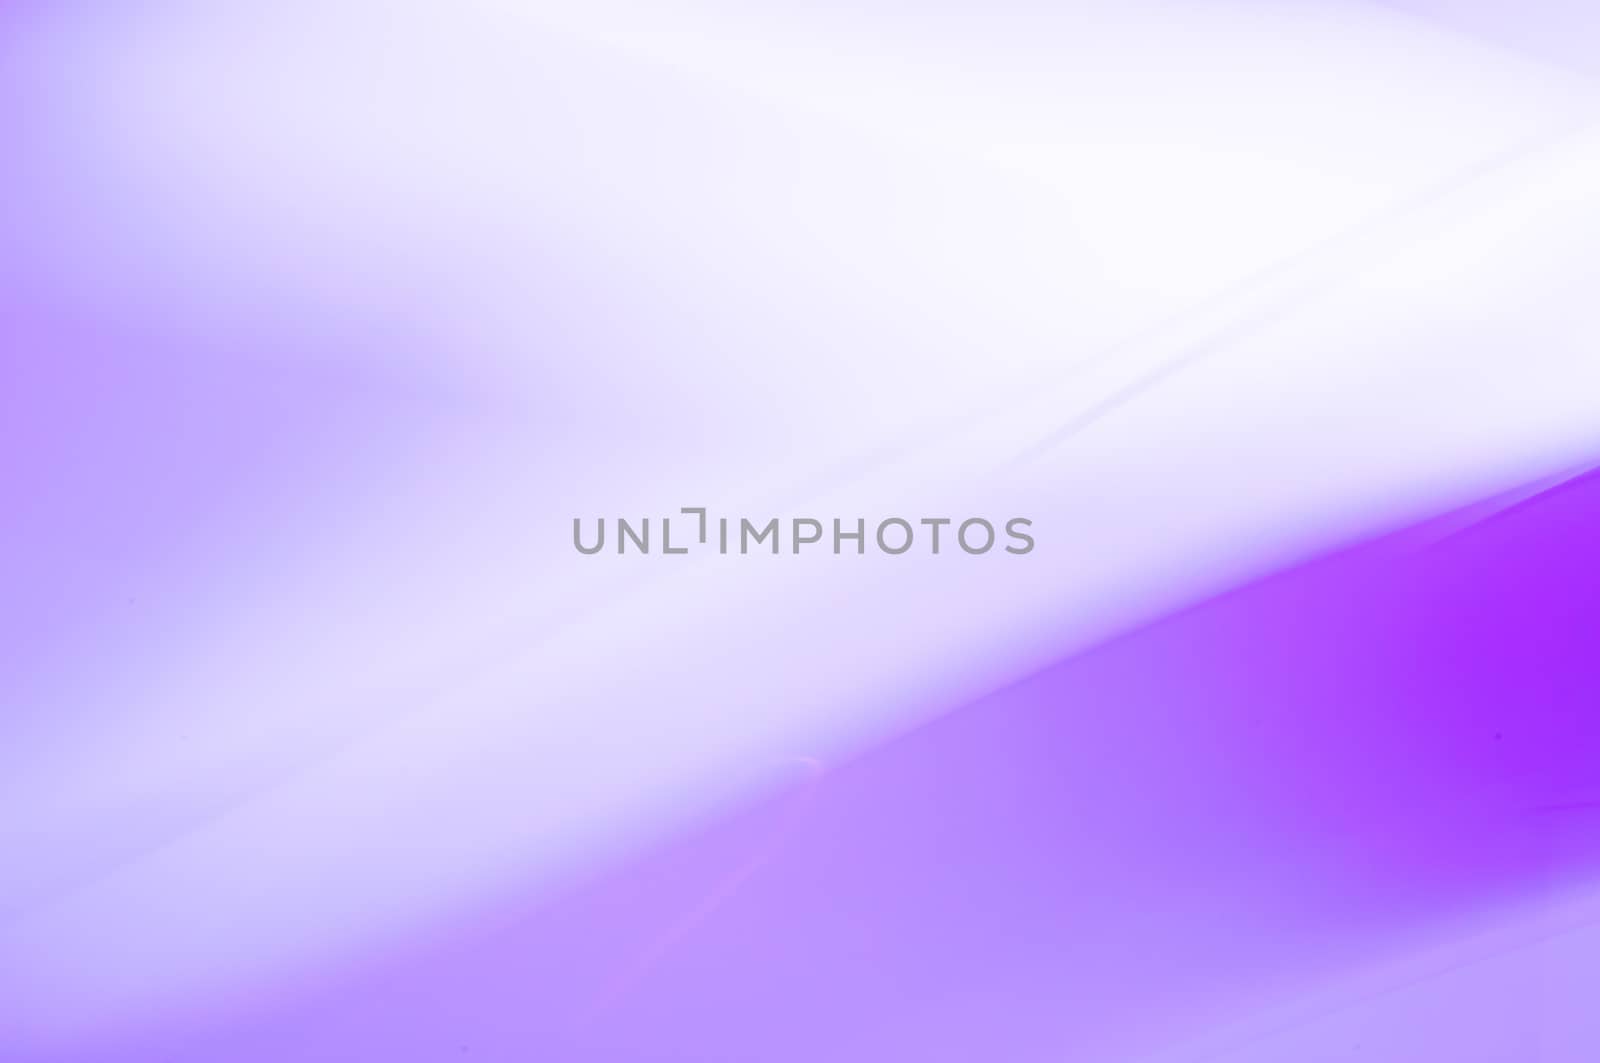 A violet and white photographic abstract background